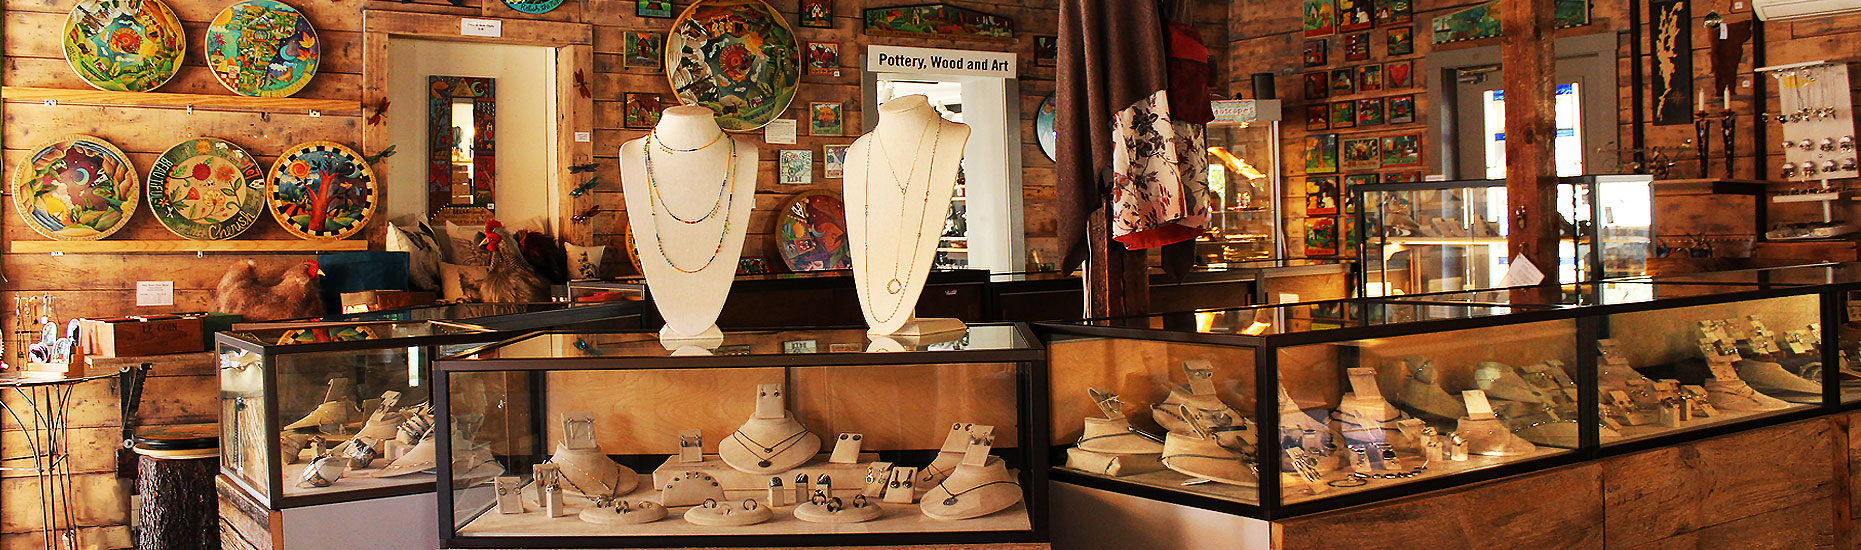 Artisan Jewelry & Home Decor Displays Inside Remarkable Things